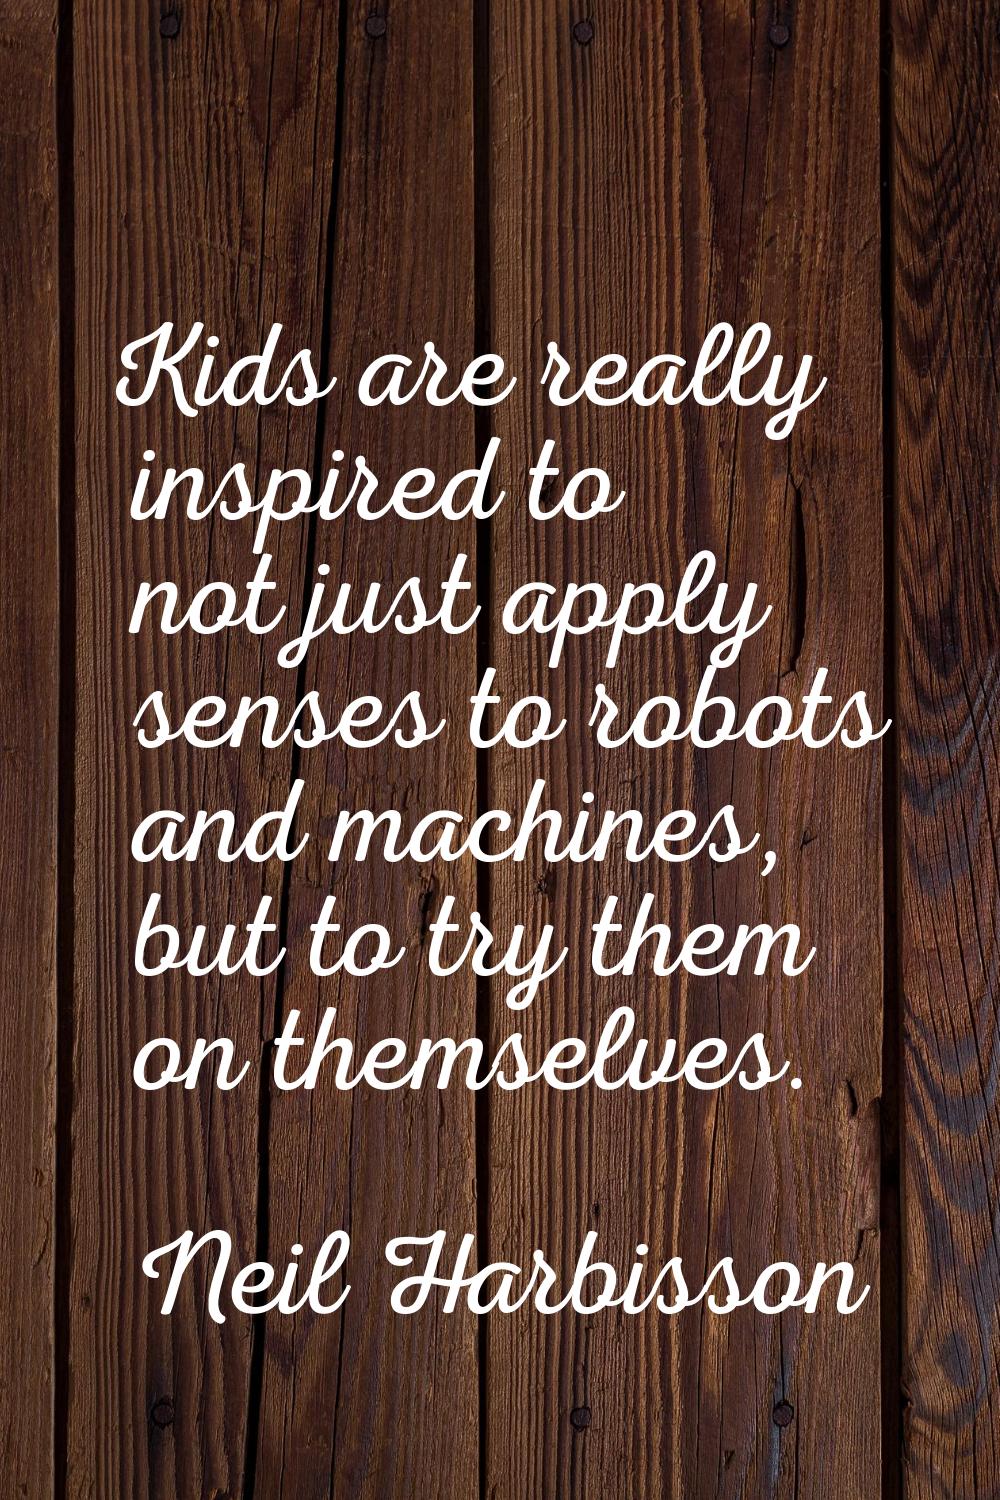 Kids are really inspired to not just apply senses to robots and machines, but to try them on themse